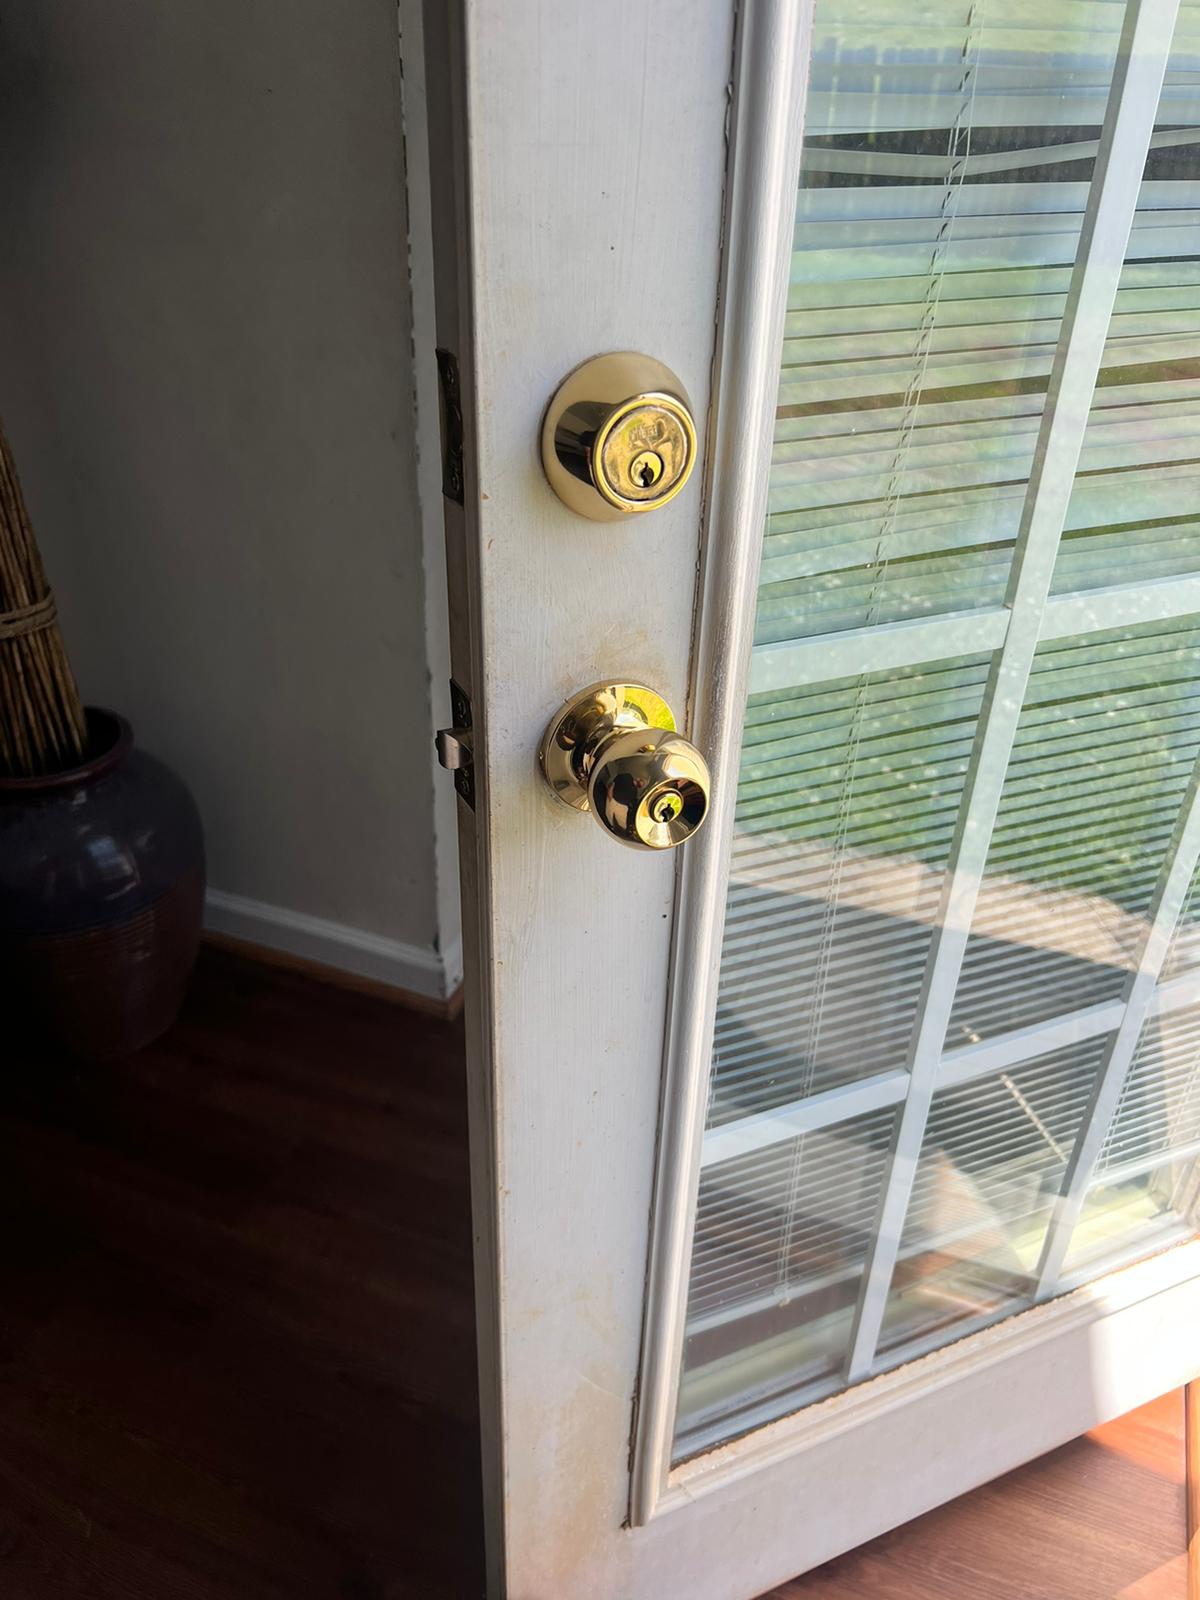 Types of locks we work with in Charlotte NC (4)